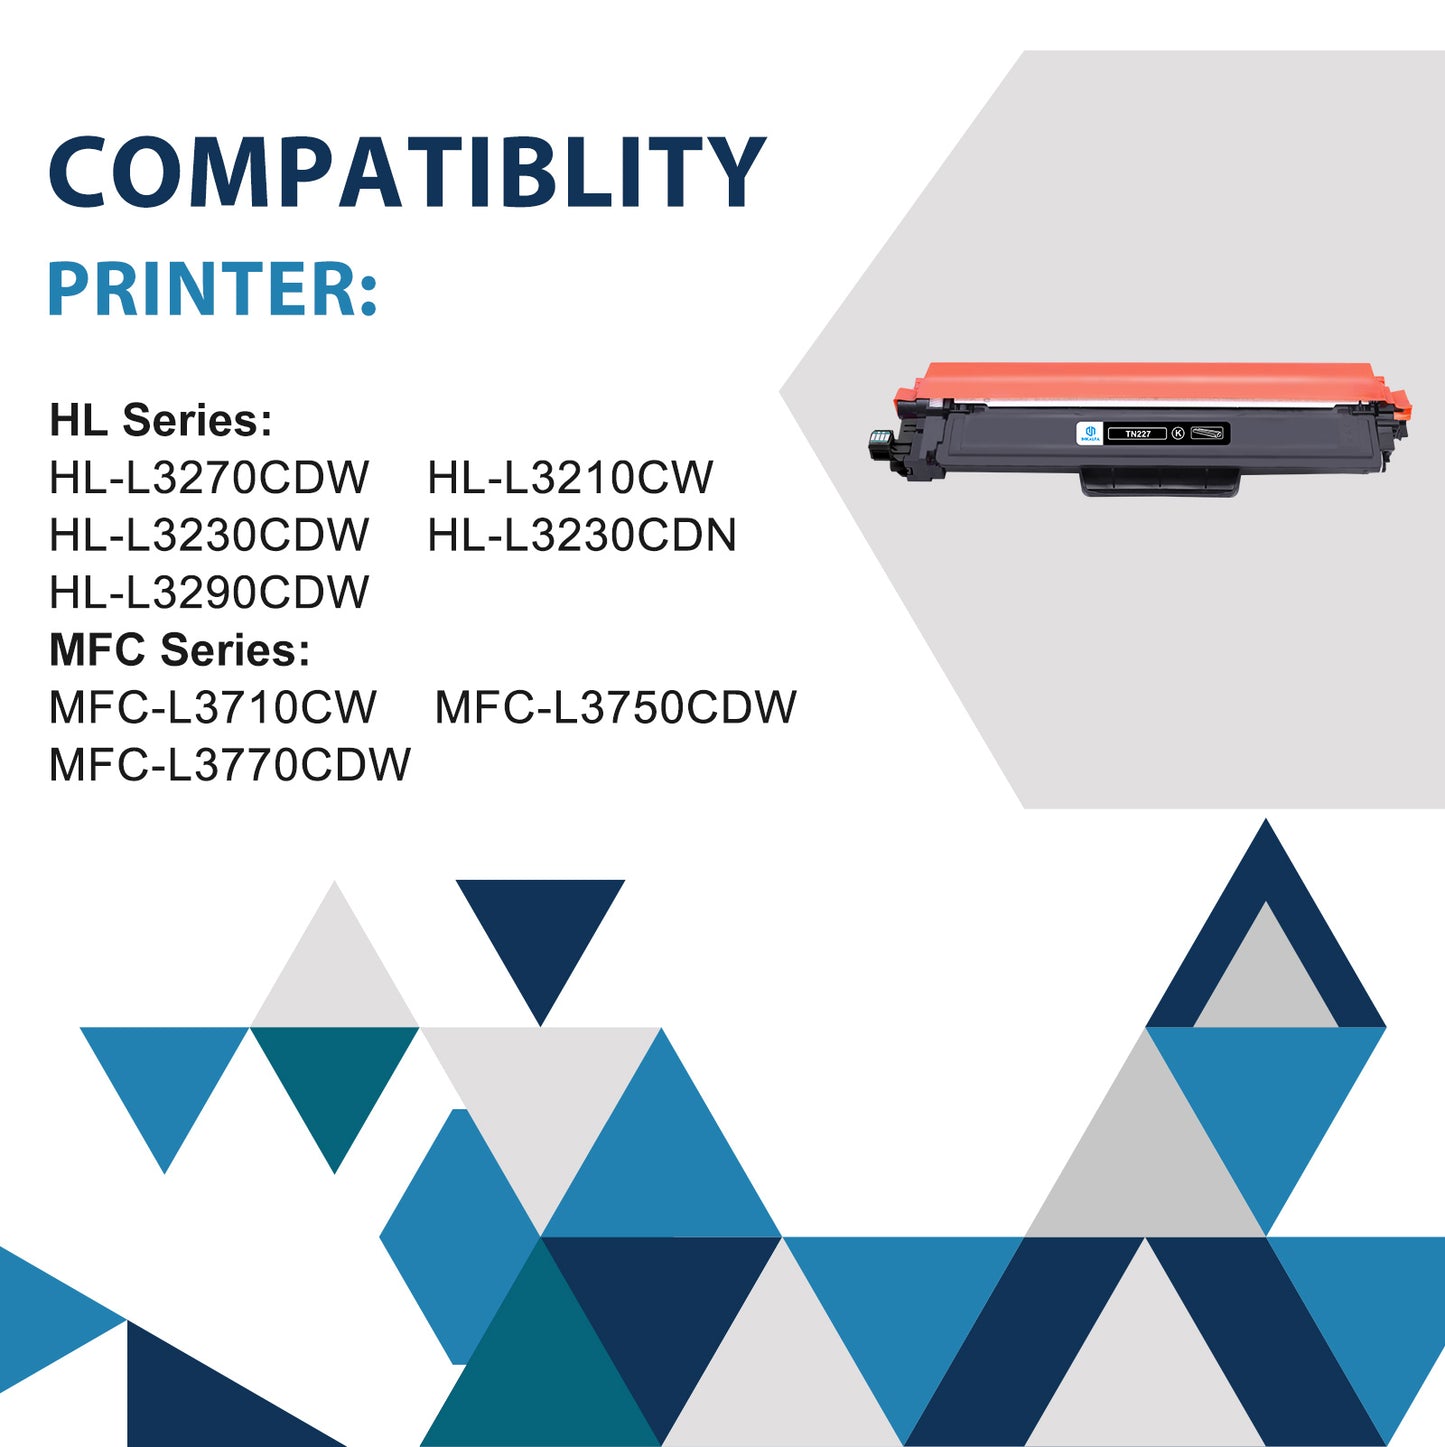 TN227 TN223 High Yield Toner Cartridge 5-Pack (with Chip) Compatible Replacement for Brother TN-227BK/C/M/Y High Yield TN227 TN223 TN-227 TN-223 TN227BK for MFC-L3770CDW MFC-L3710CW HL-L3270CDW Toner